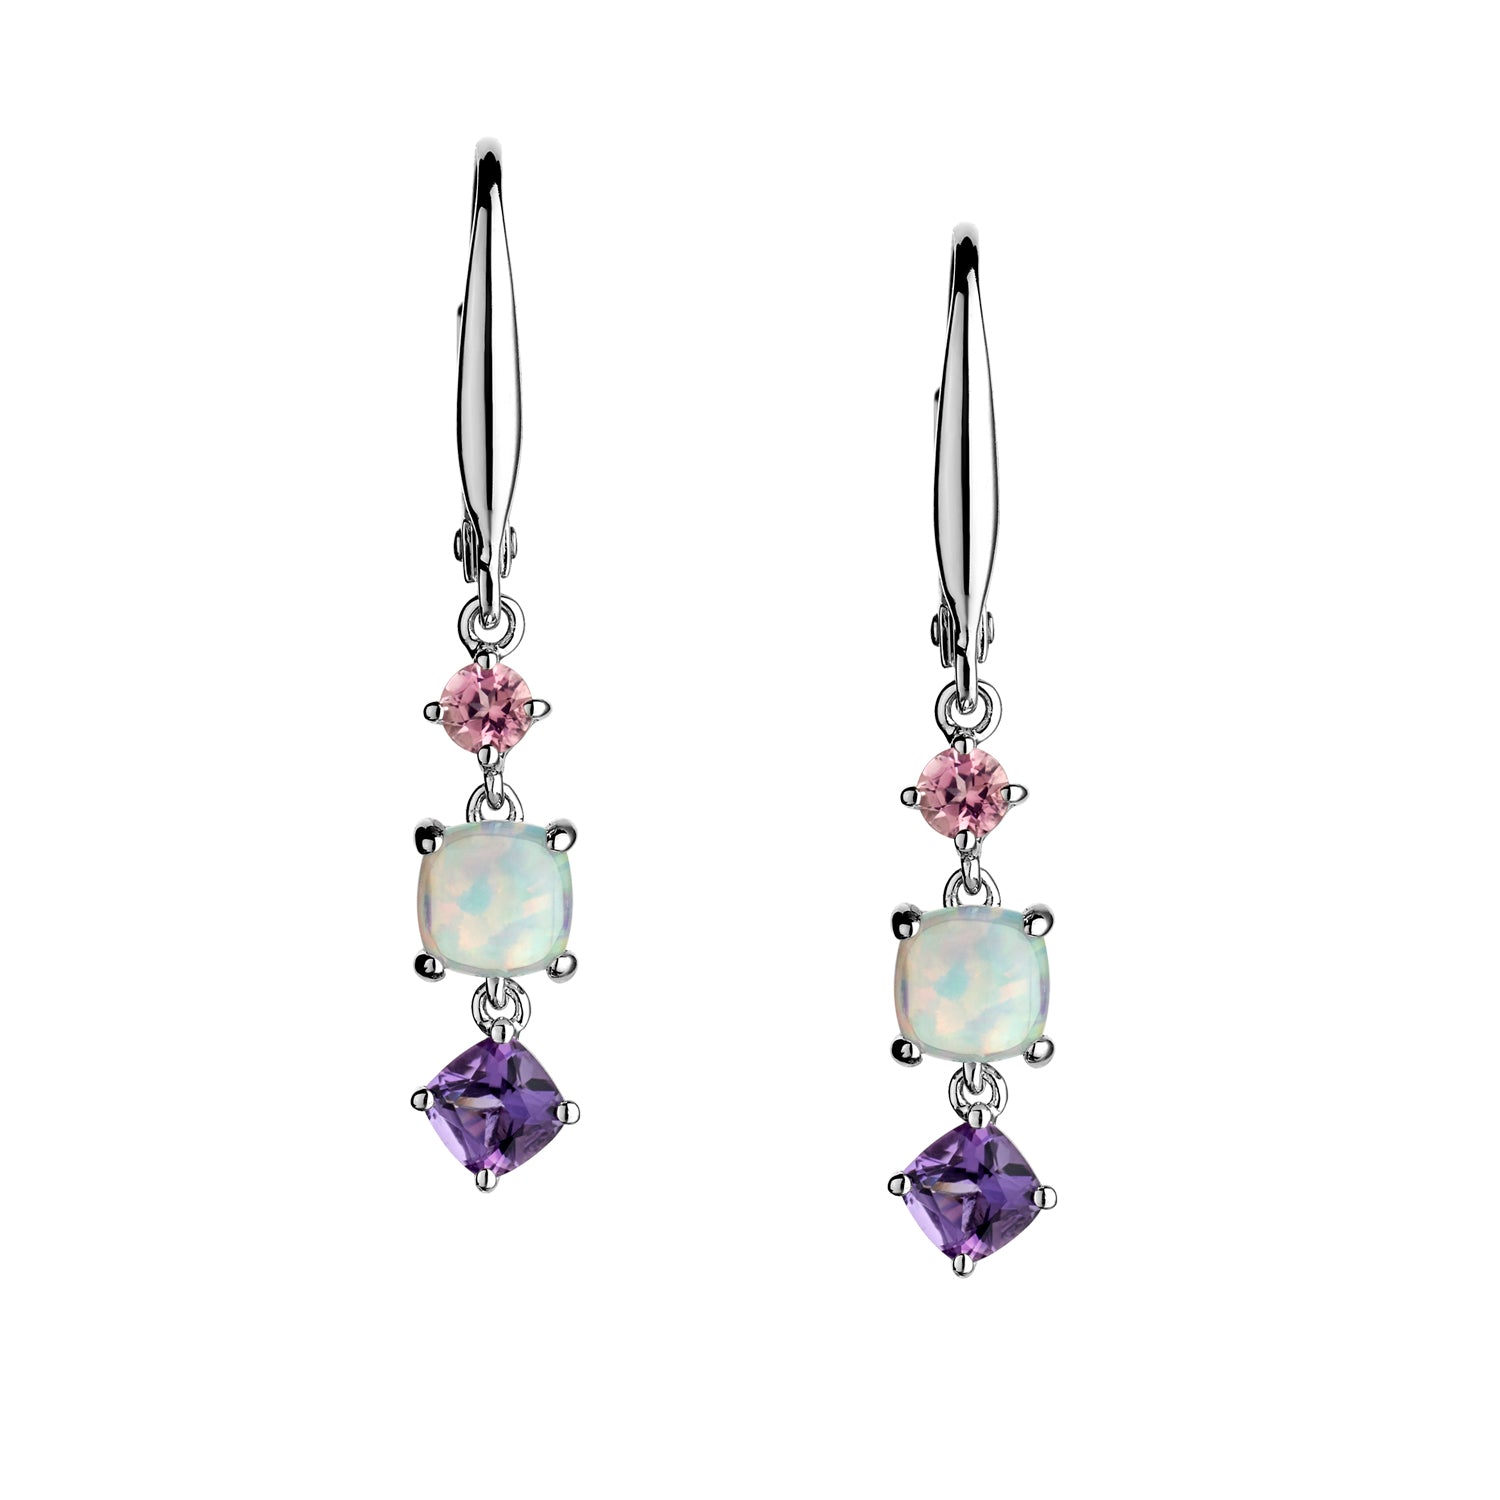 GENUINE AMETHYST, PINK TOURMALINE AND CREATED OPAL DROP EARRINGS, SILVER.....................NOW